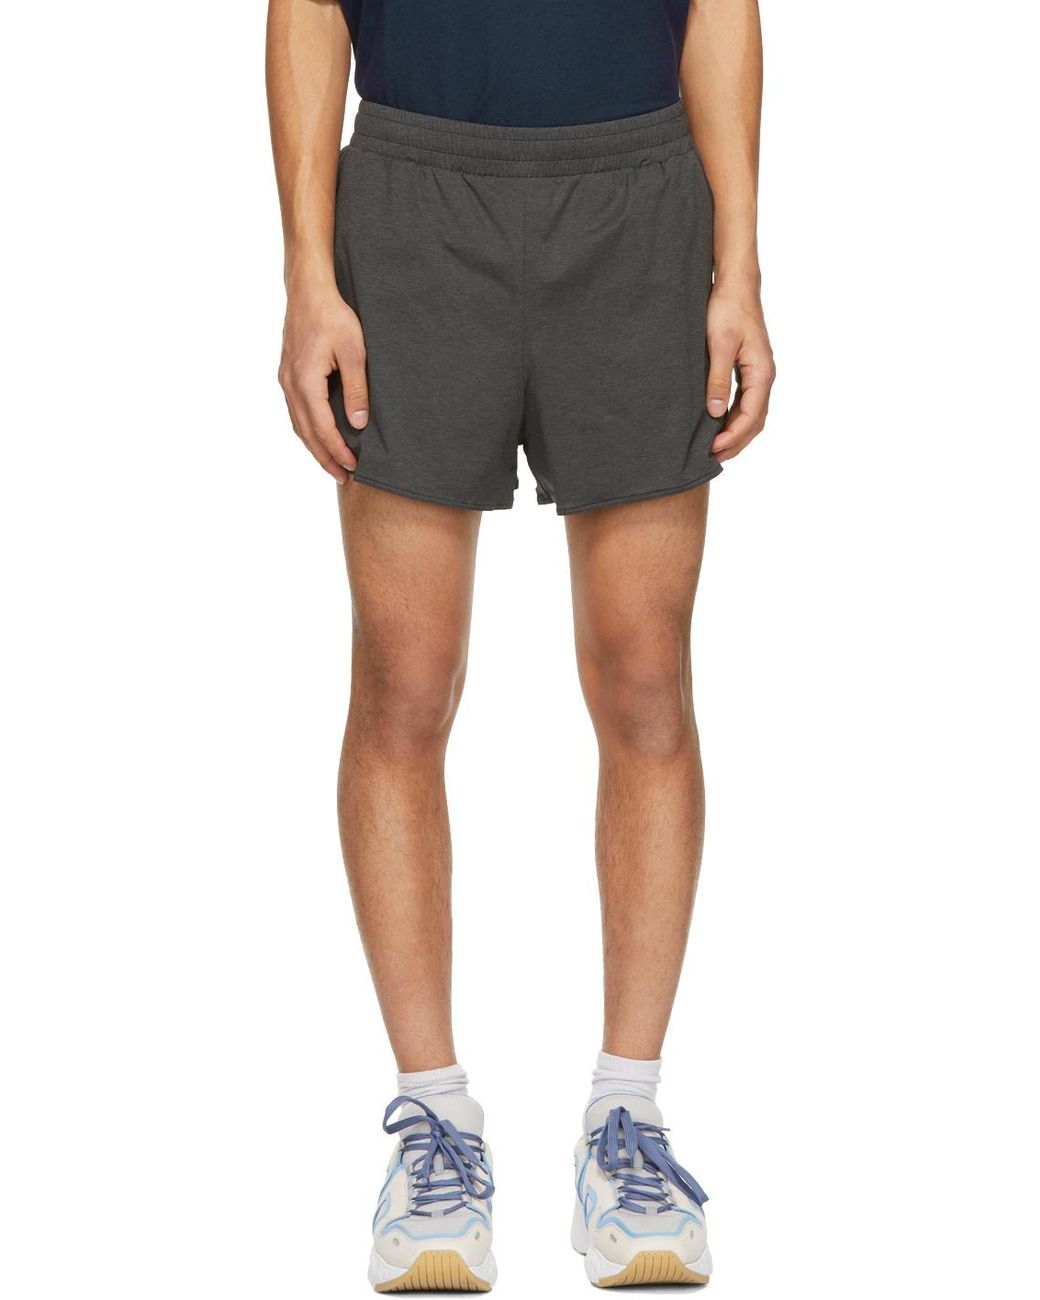 Acne Studios Synthetic Jersey Running Shorts in Black for Men - Lyst